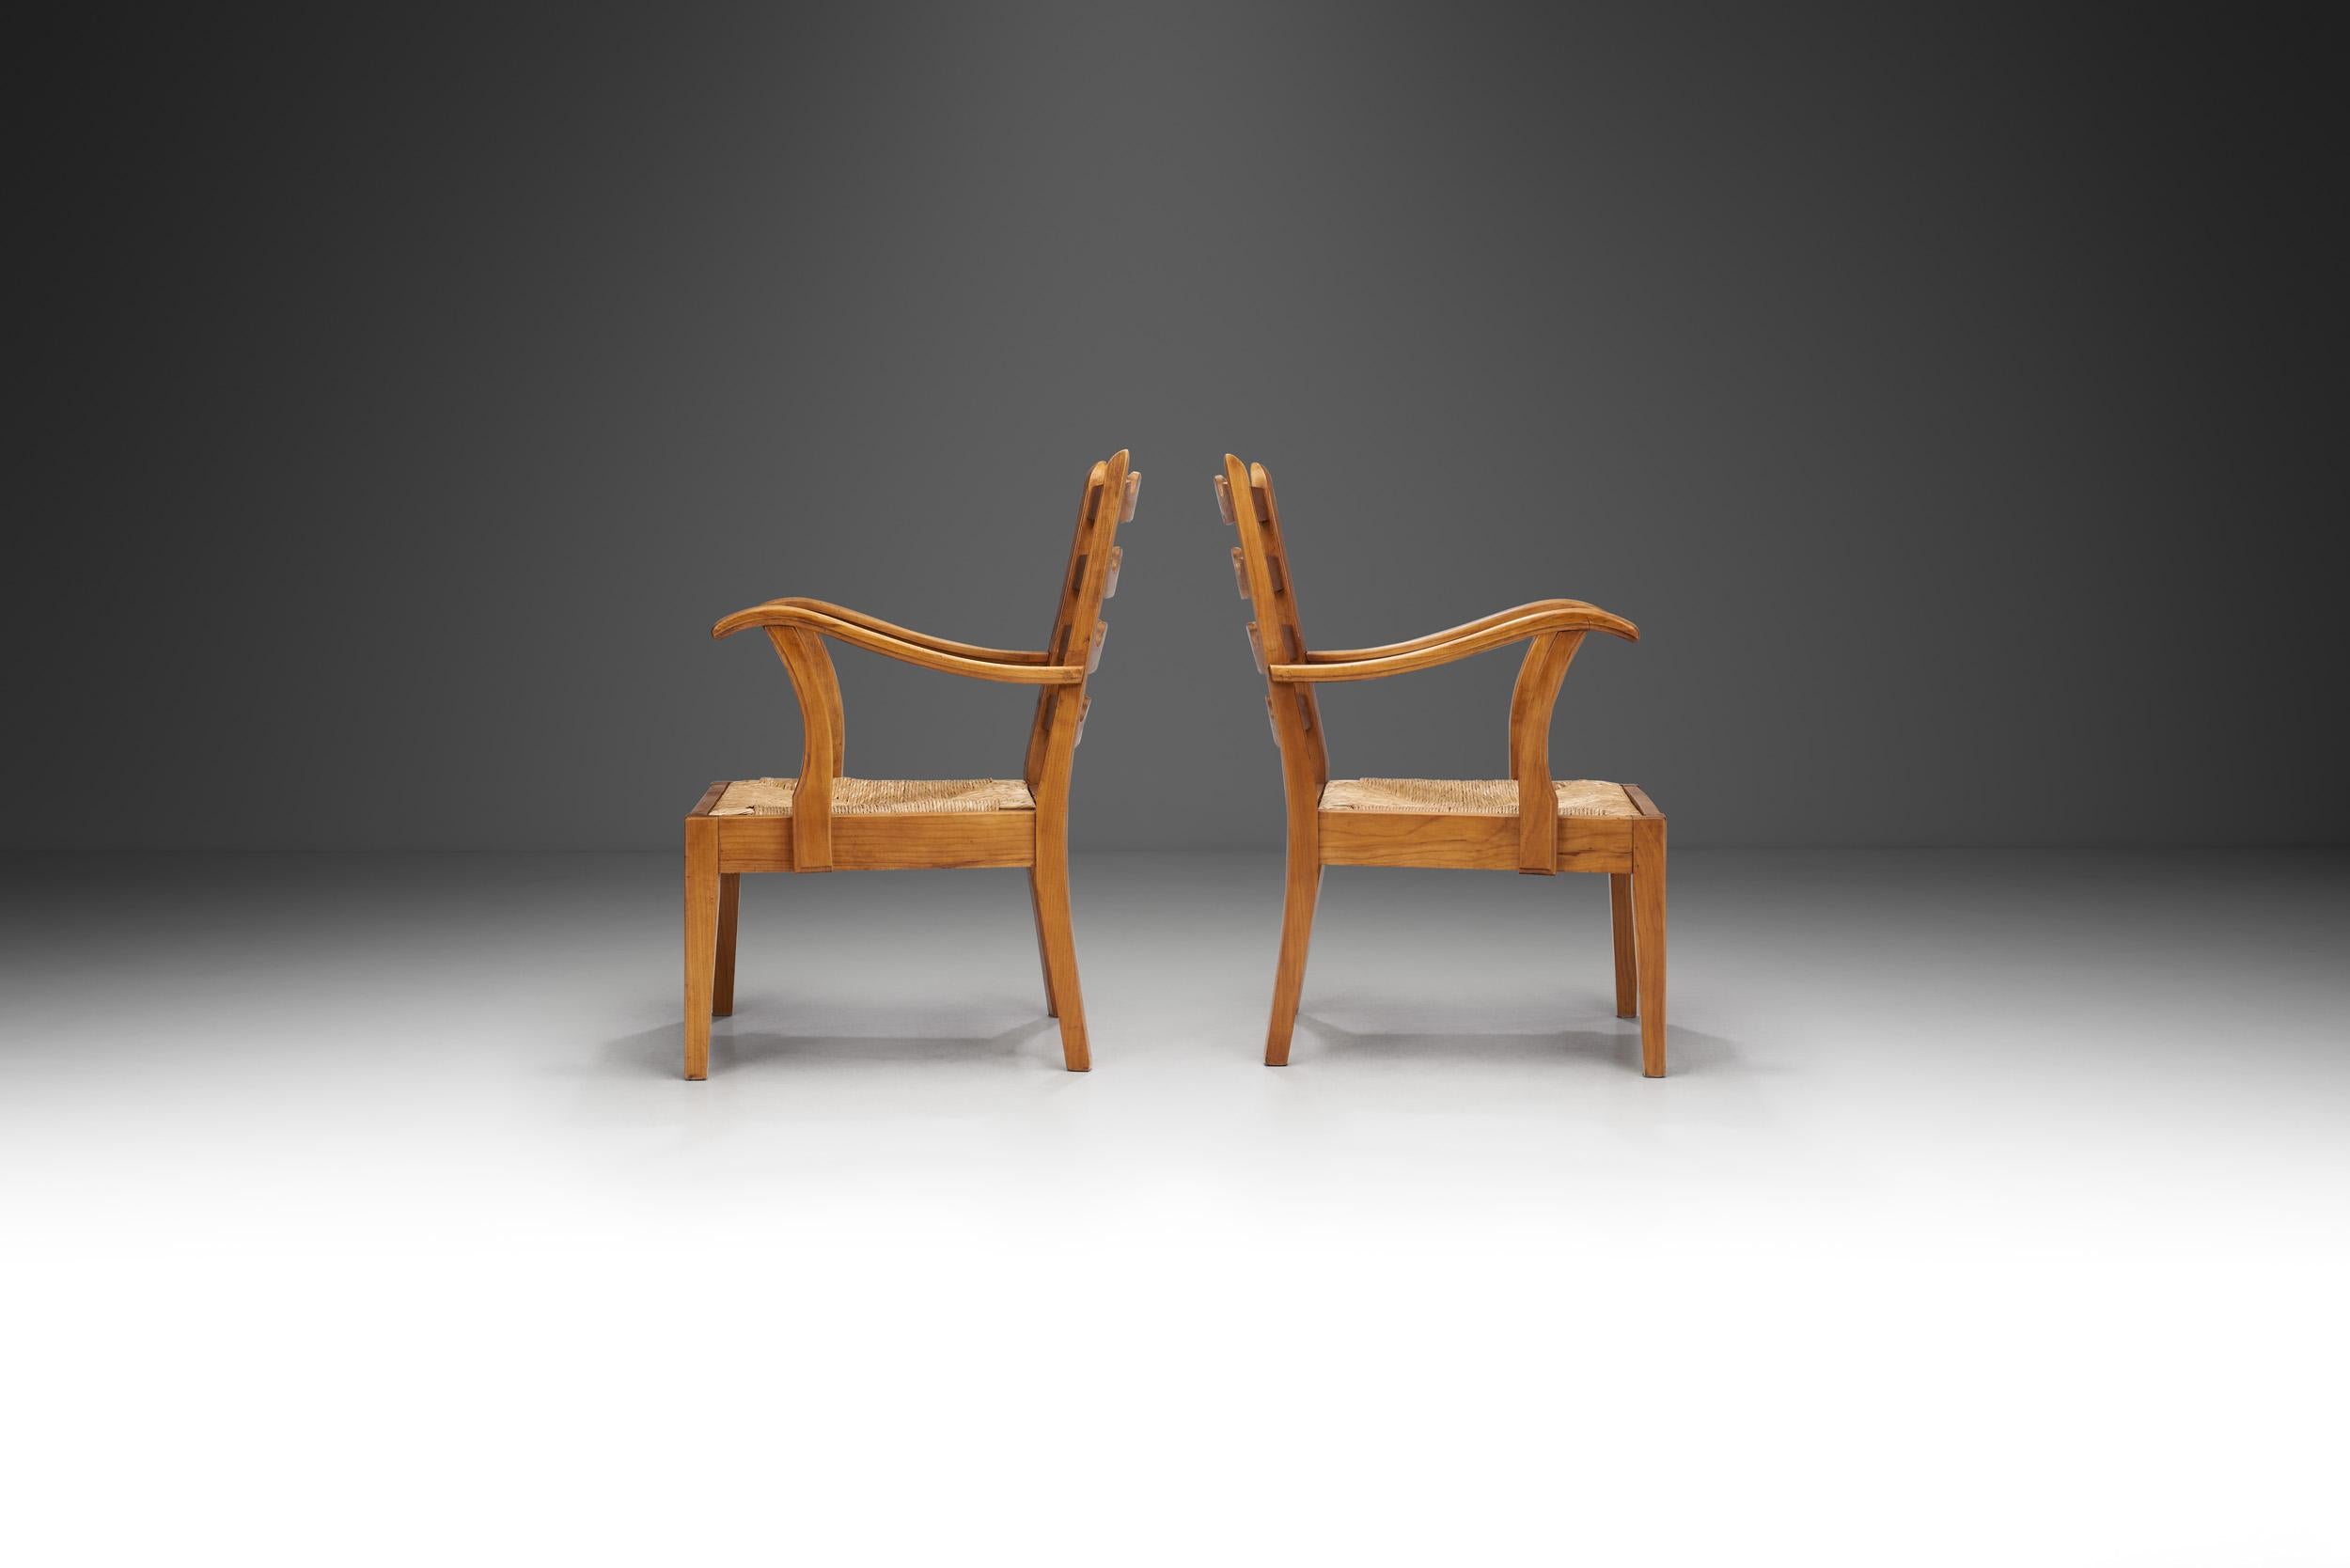 Mid-20th Century French Cherry Wood Chairs with Seats of Woven Papercord, France 1950s For Sale